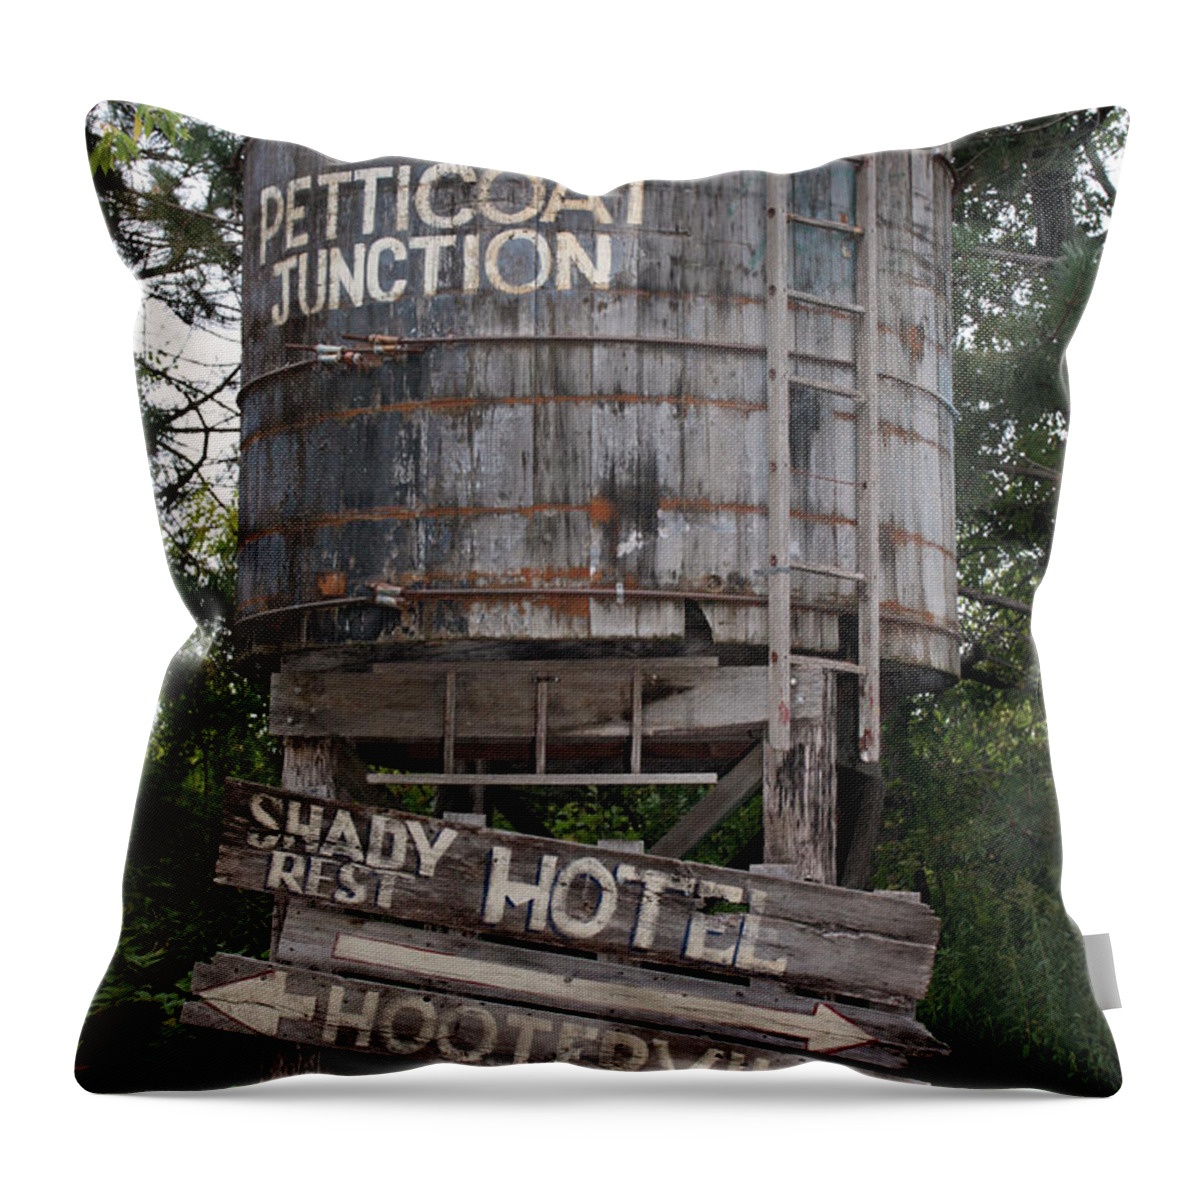 Petticoat Junction Throw Pillow featuring the photograph Petticoat Junction by Kristin Elmquist